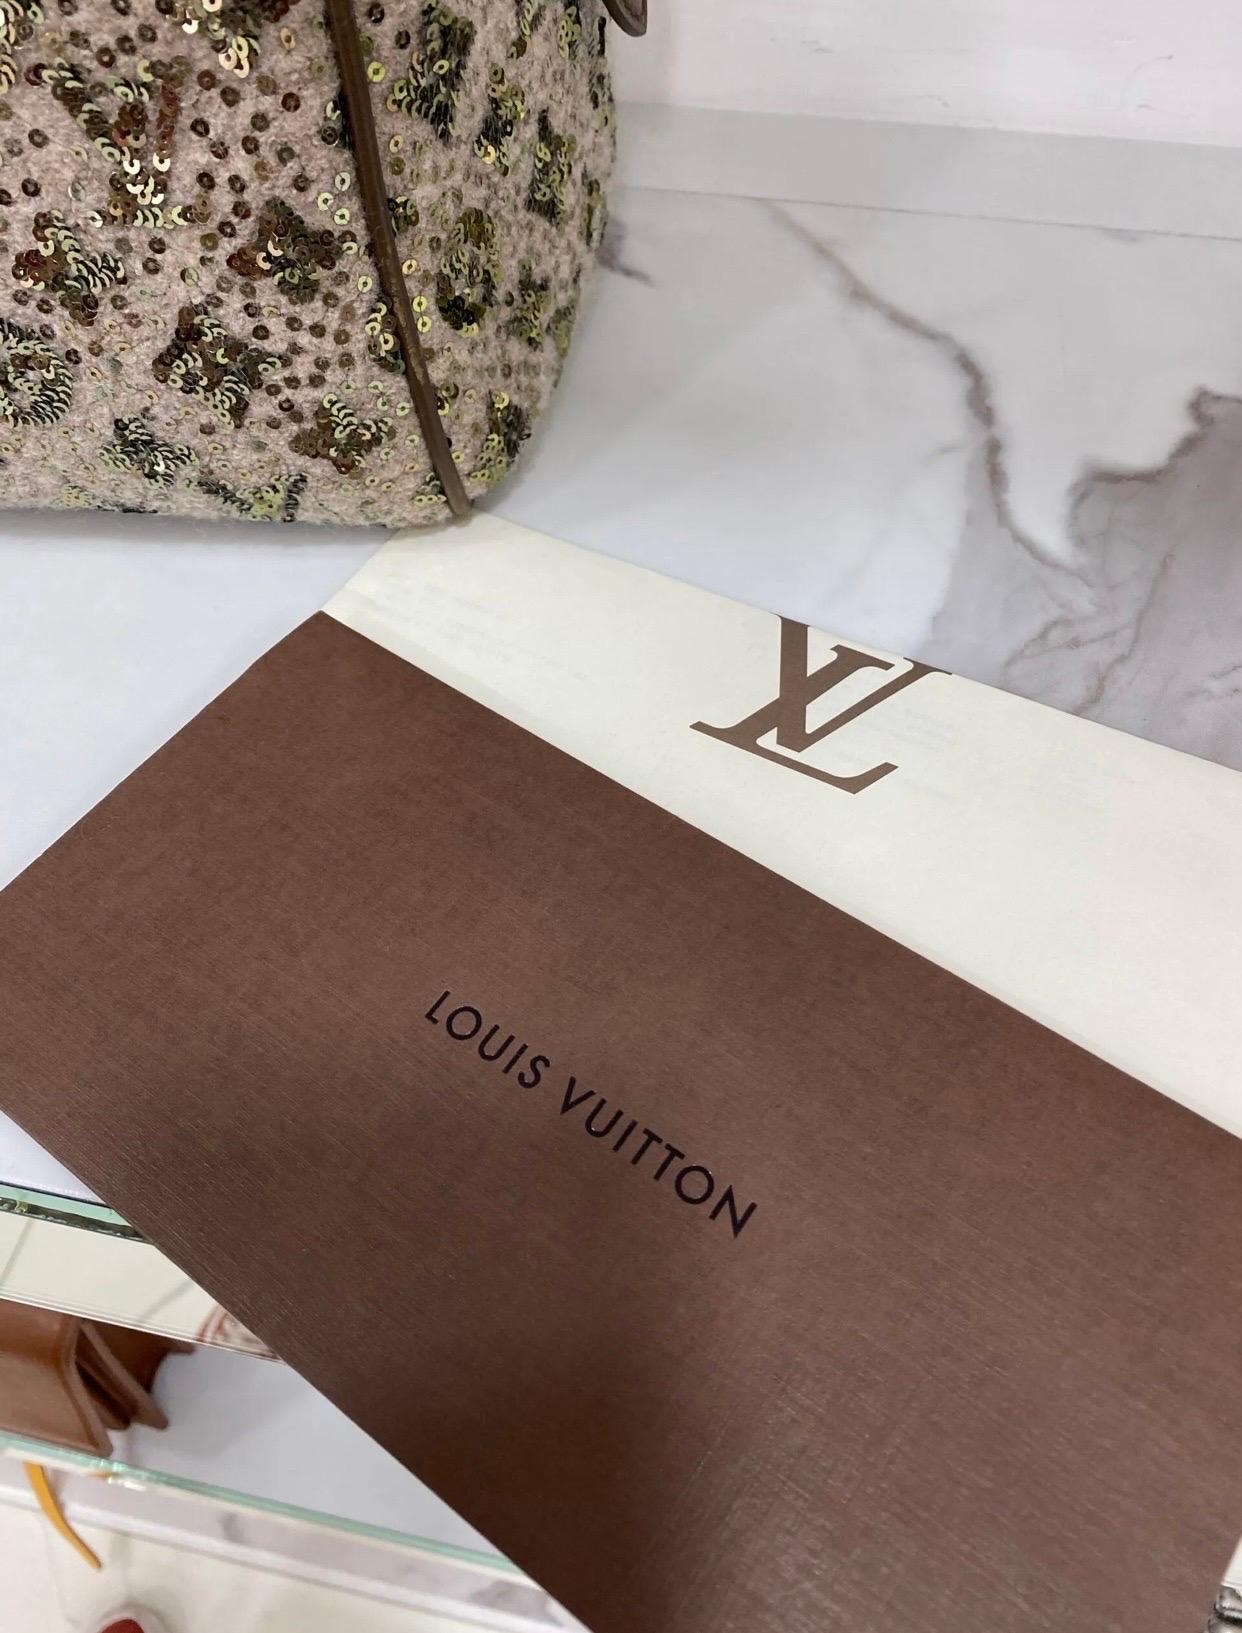 Louis Vuitton  Sunshine Express Speedy Bag Limited Edition Khaki Monogram In Excellent Condition For Sale In Torre Del Greco, IT